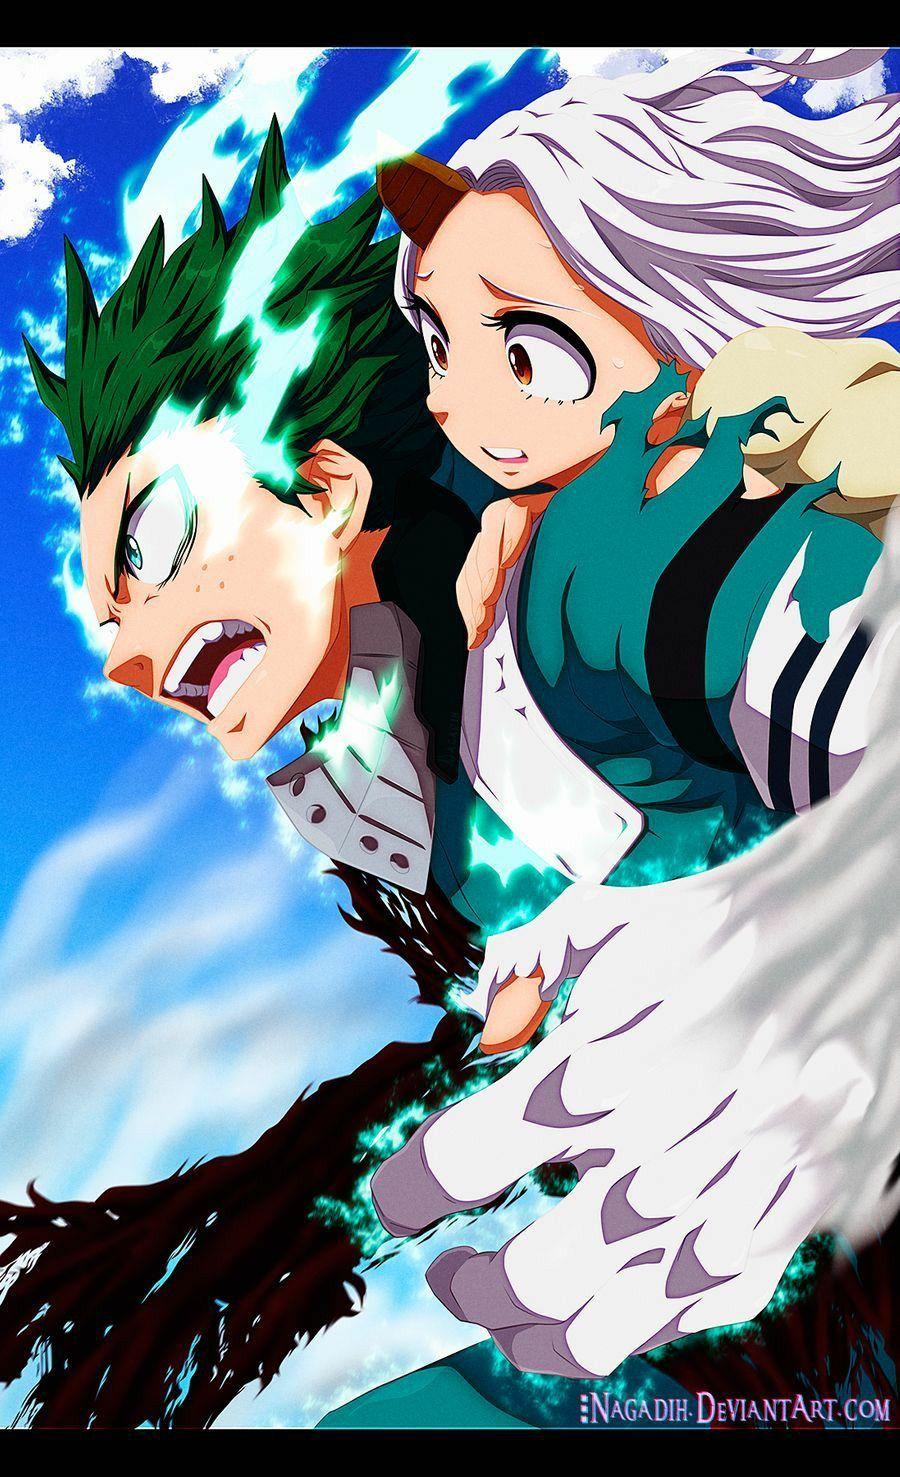 New my hero academia wallpaper for phone vol. 2 in 2020